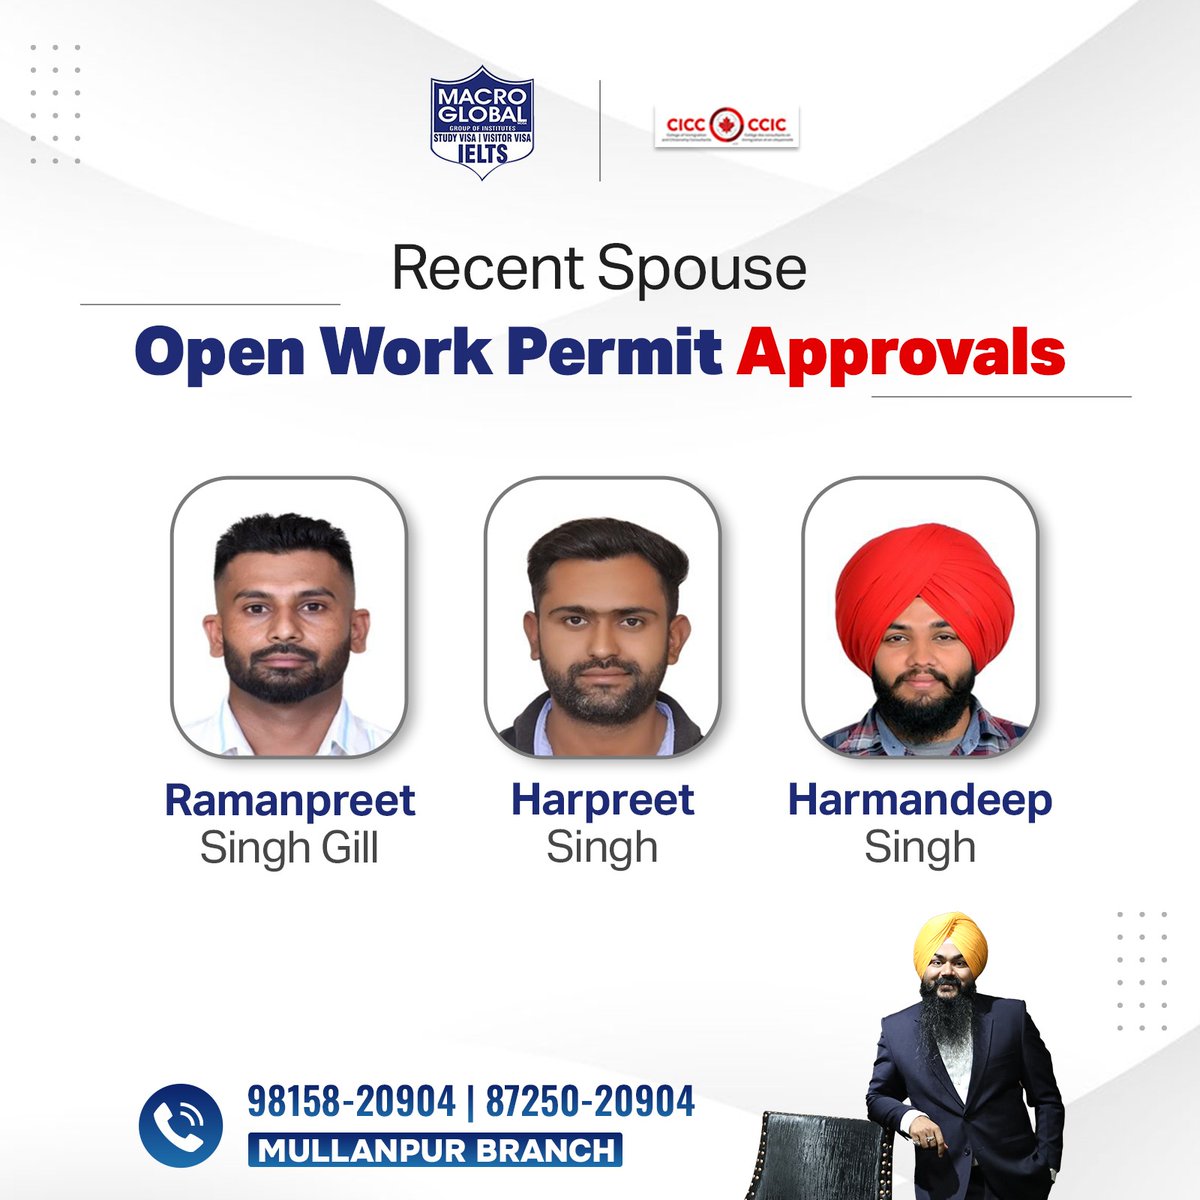 🚀 Dreams to Reality! 🇨🇦 Celebrating Our Clients' Success with Canada Open Work Permit Approvals.
#MacroGlobal #GurmilapSinghDalla #Canada #Canadastudyvisa #canadaopenworkpermit #spousevisa #Visitorvisa #Visa #IELTS #IELTSTraining #EnrollNow #Immigration #immigrationlawyer